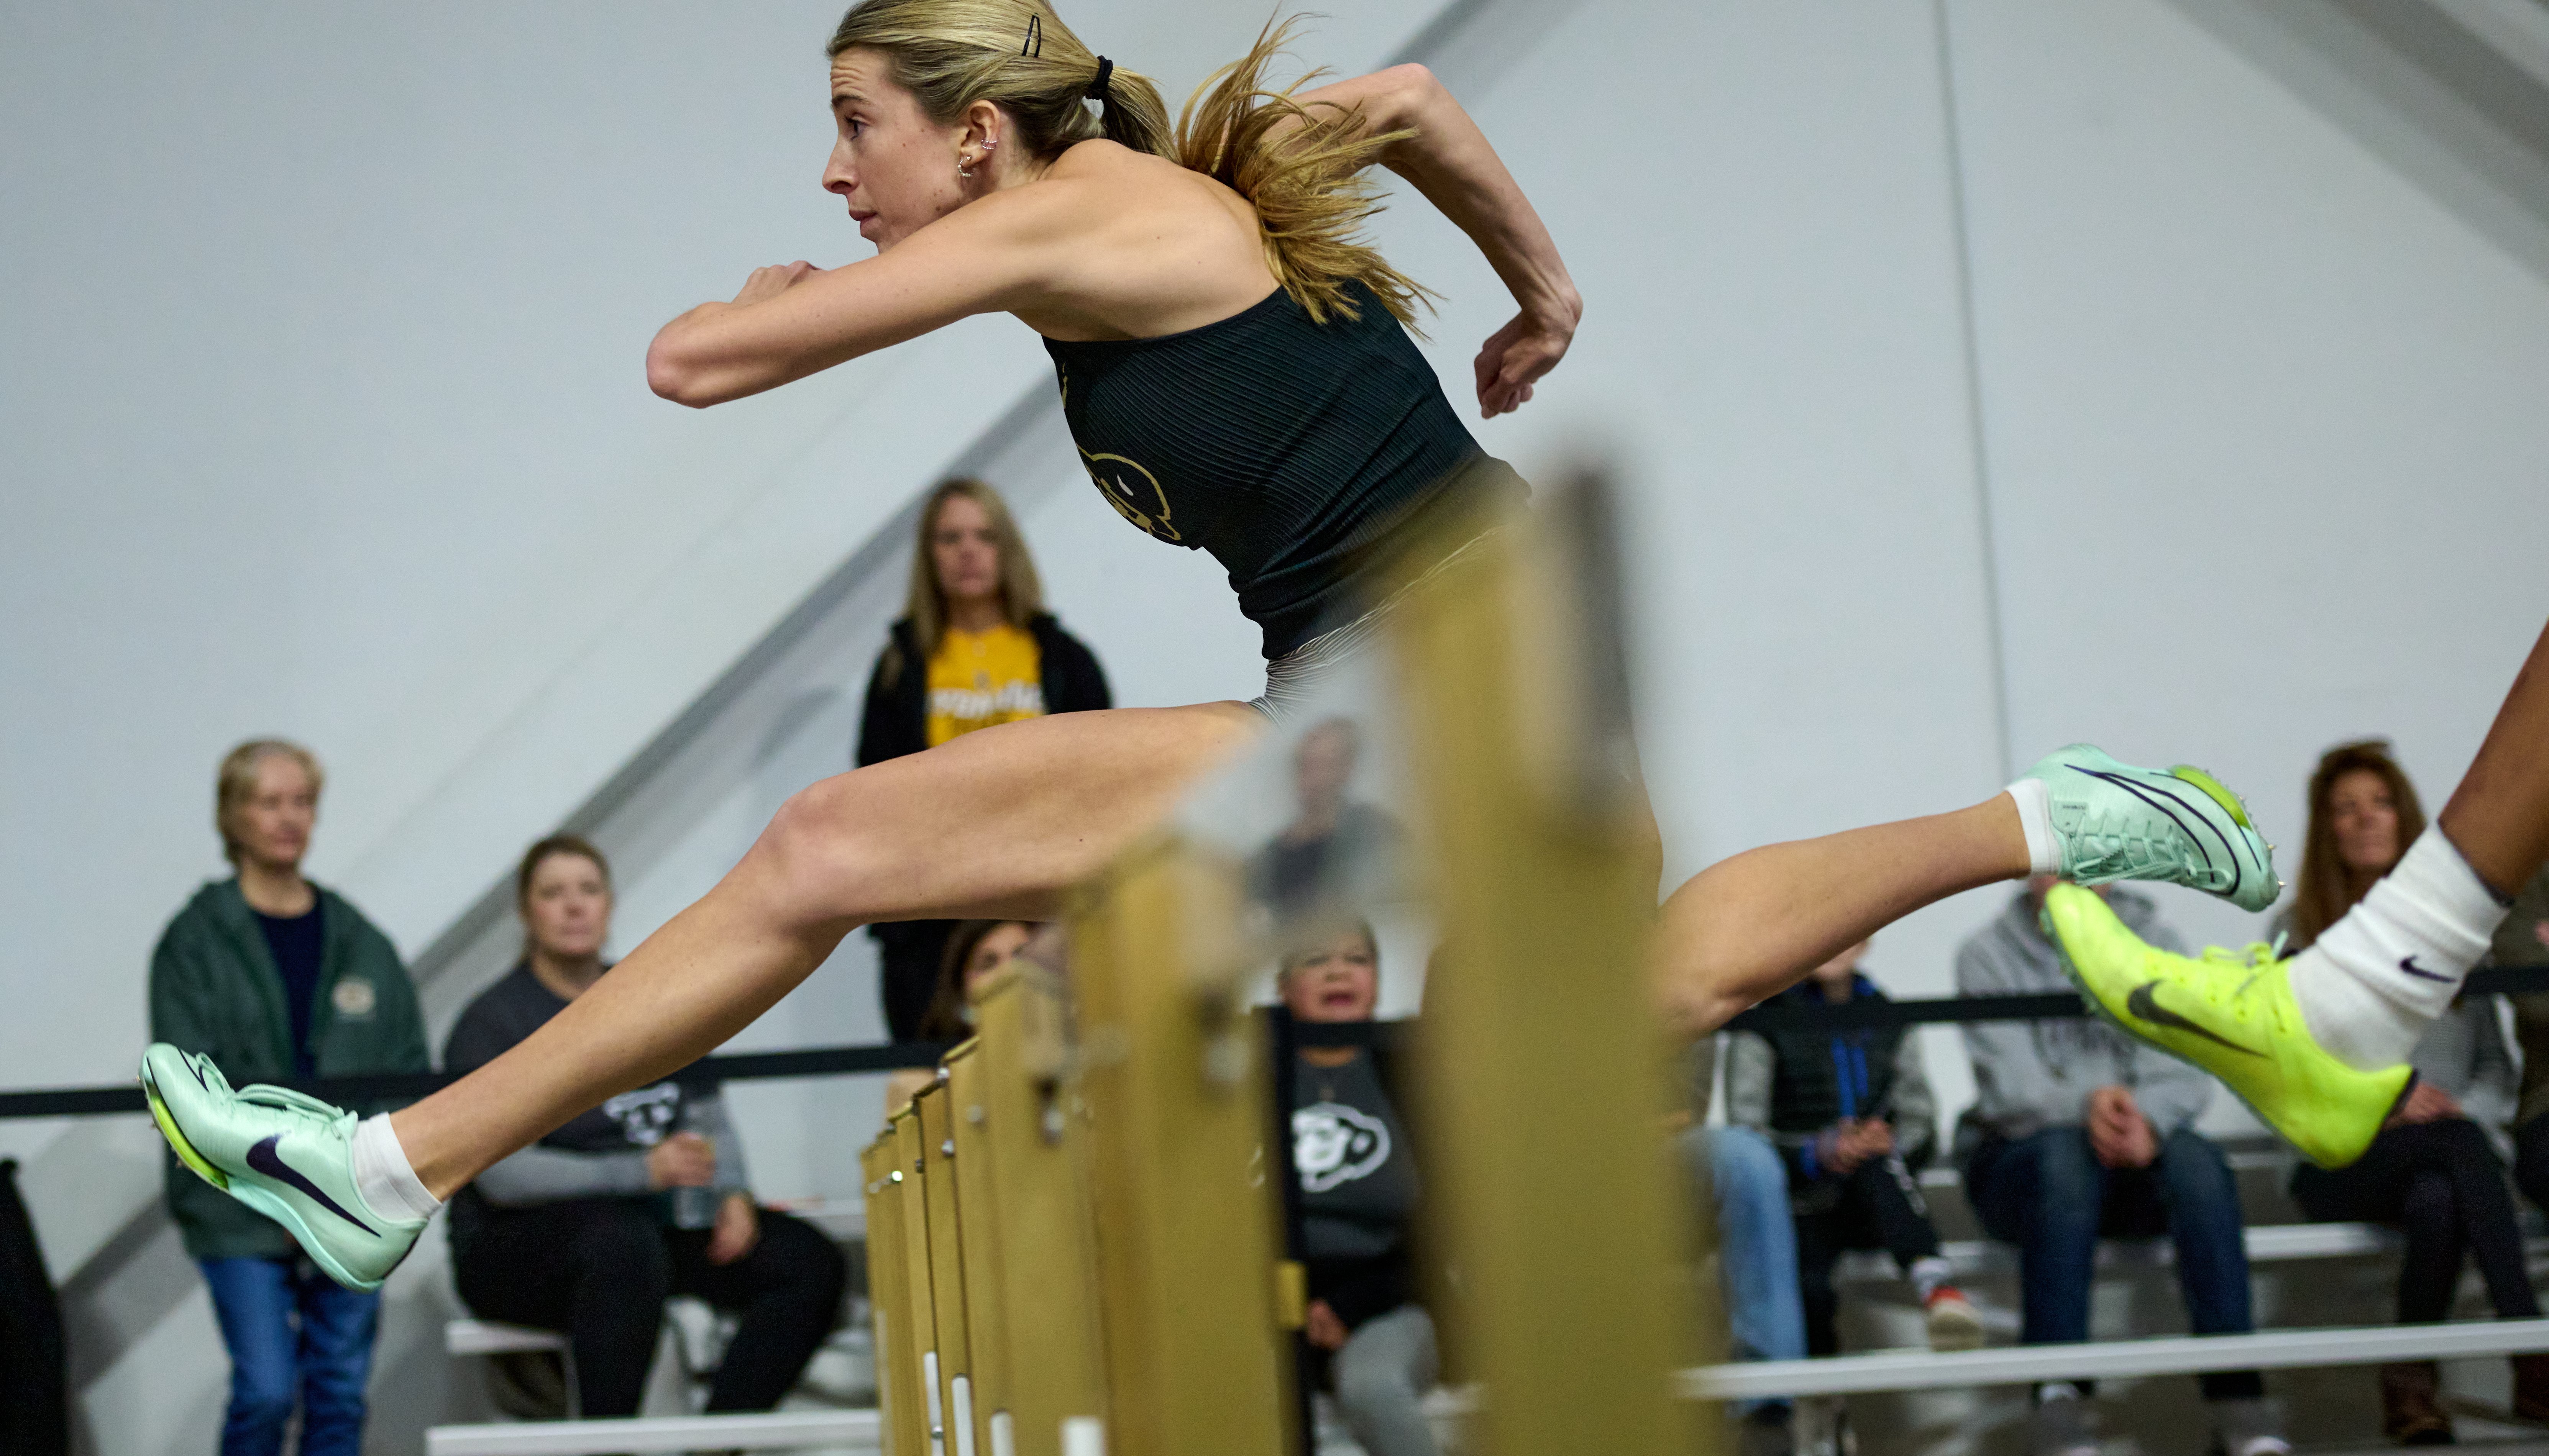 Read Colorado connections at the NCAA Indoor National Championships by Lane1Photos by Dave Albo